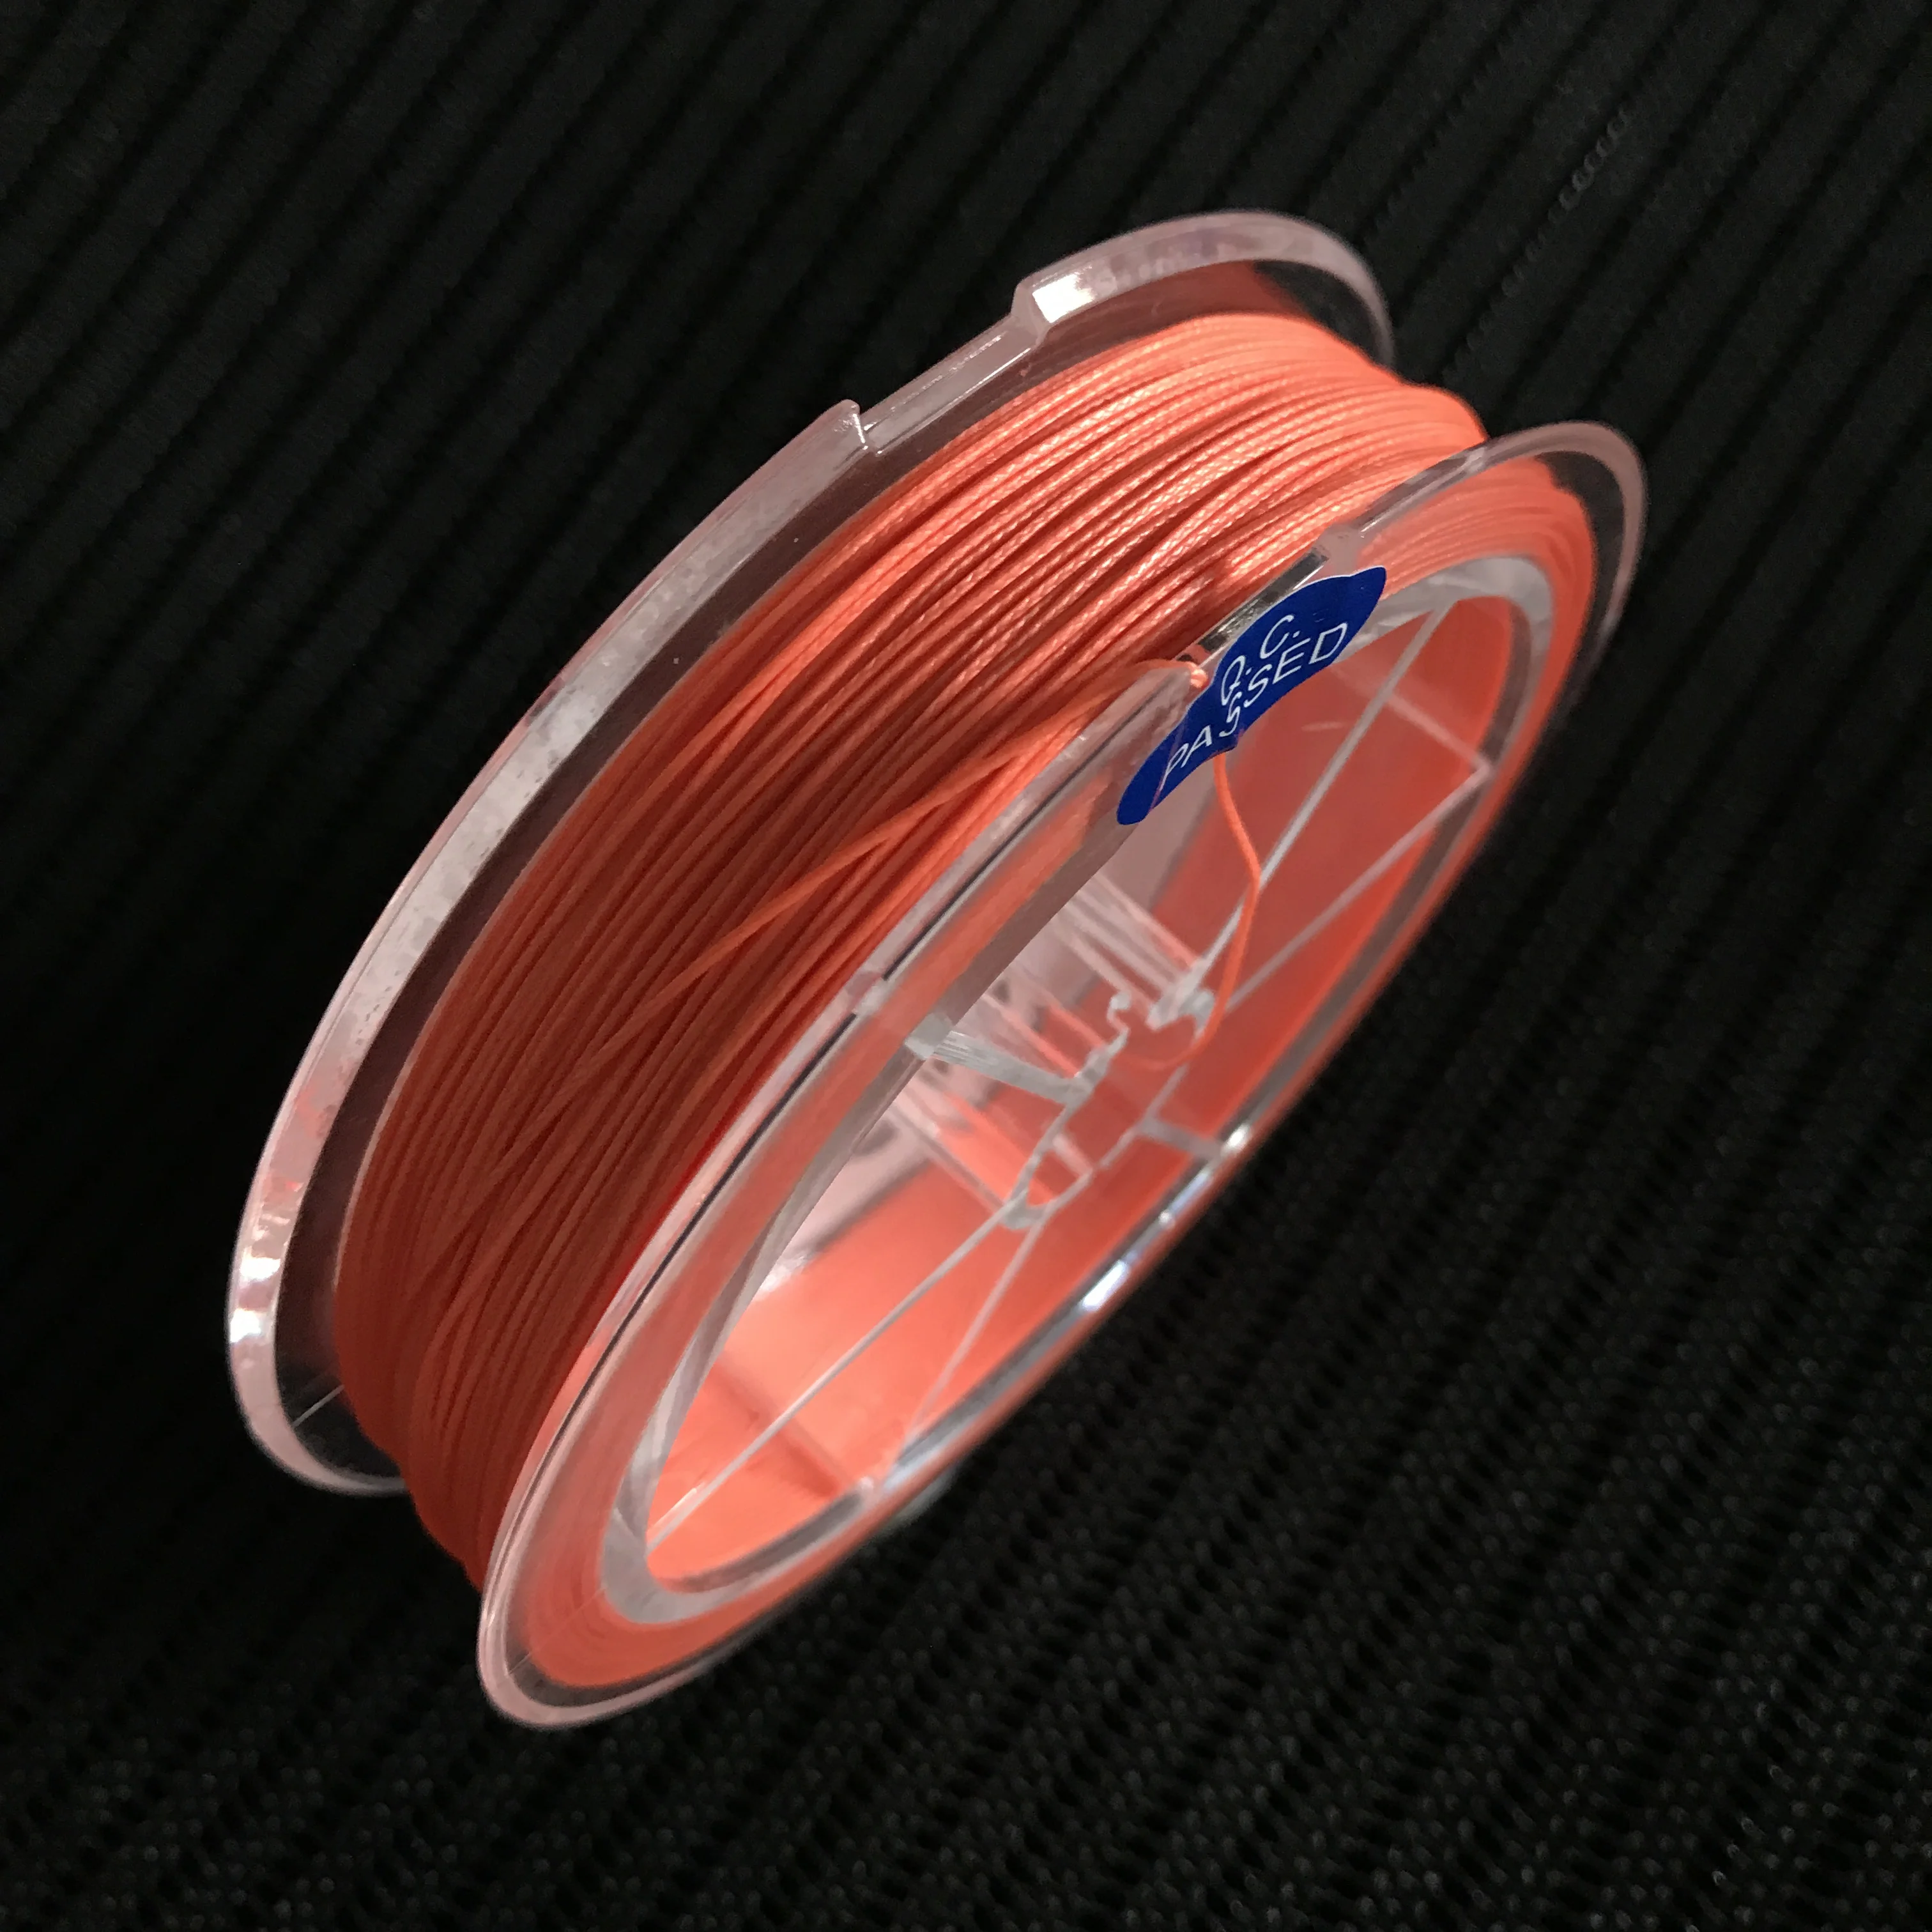 8 Strands Braided Fishing Line 500m Super Strong Japan PE Wire 8LB